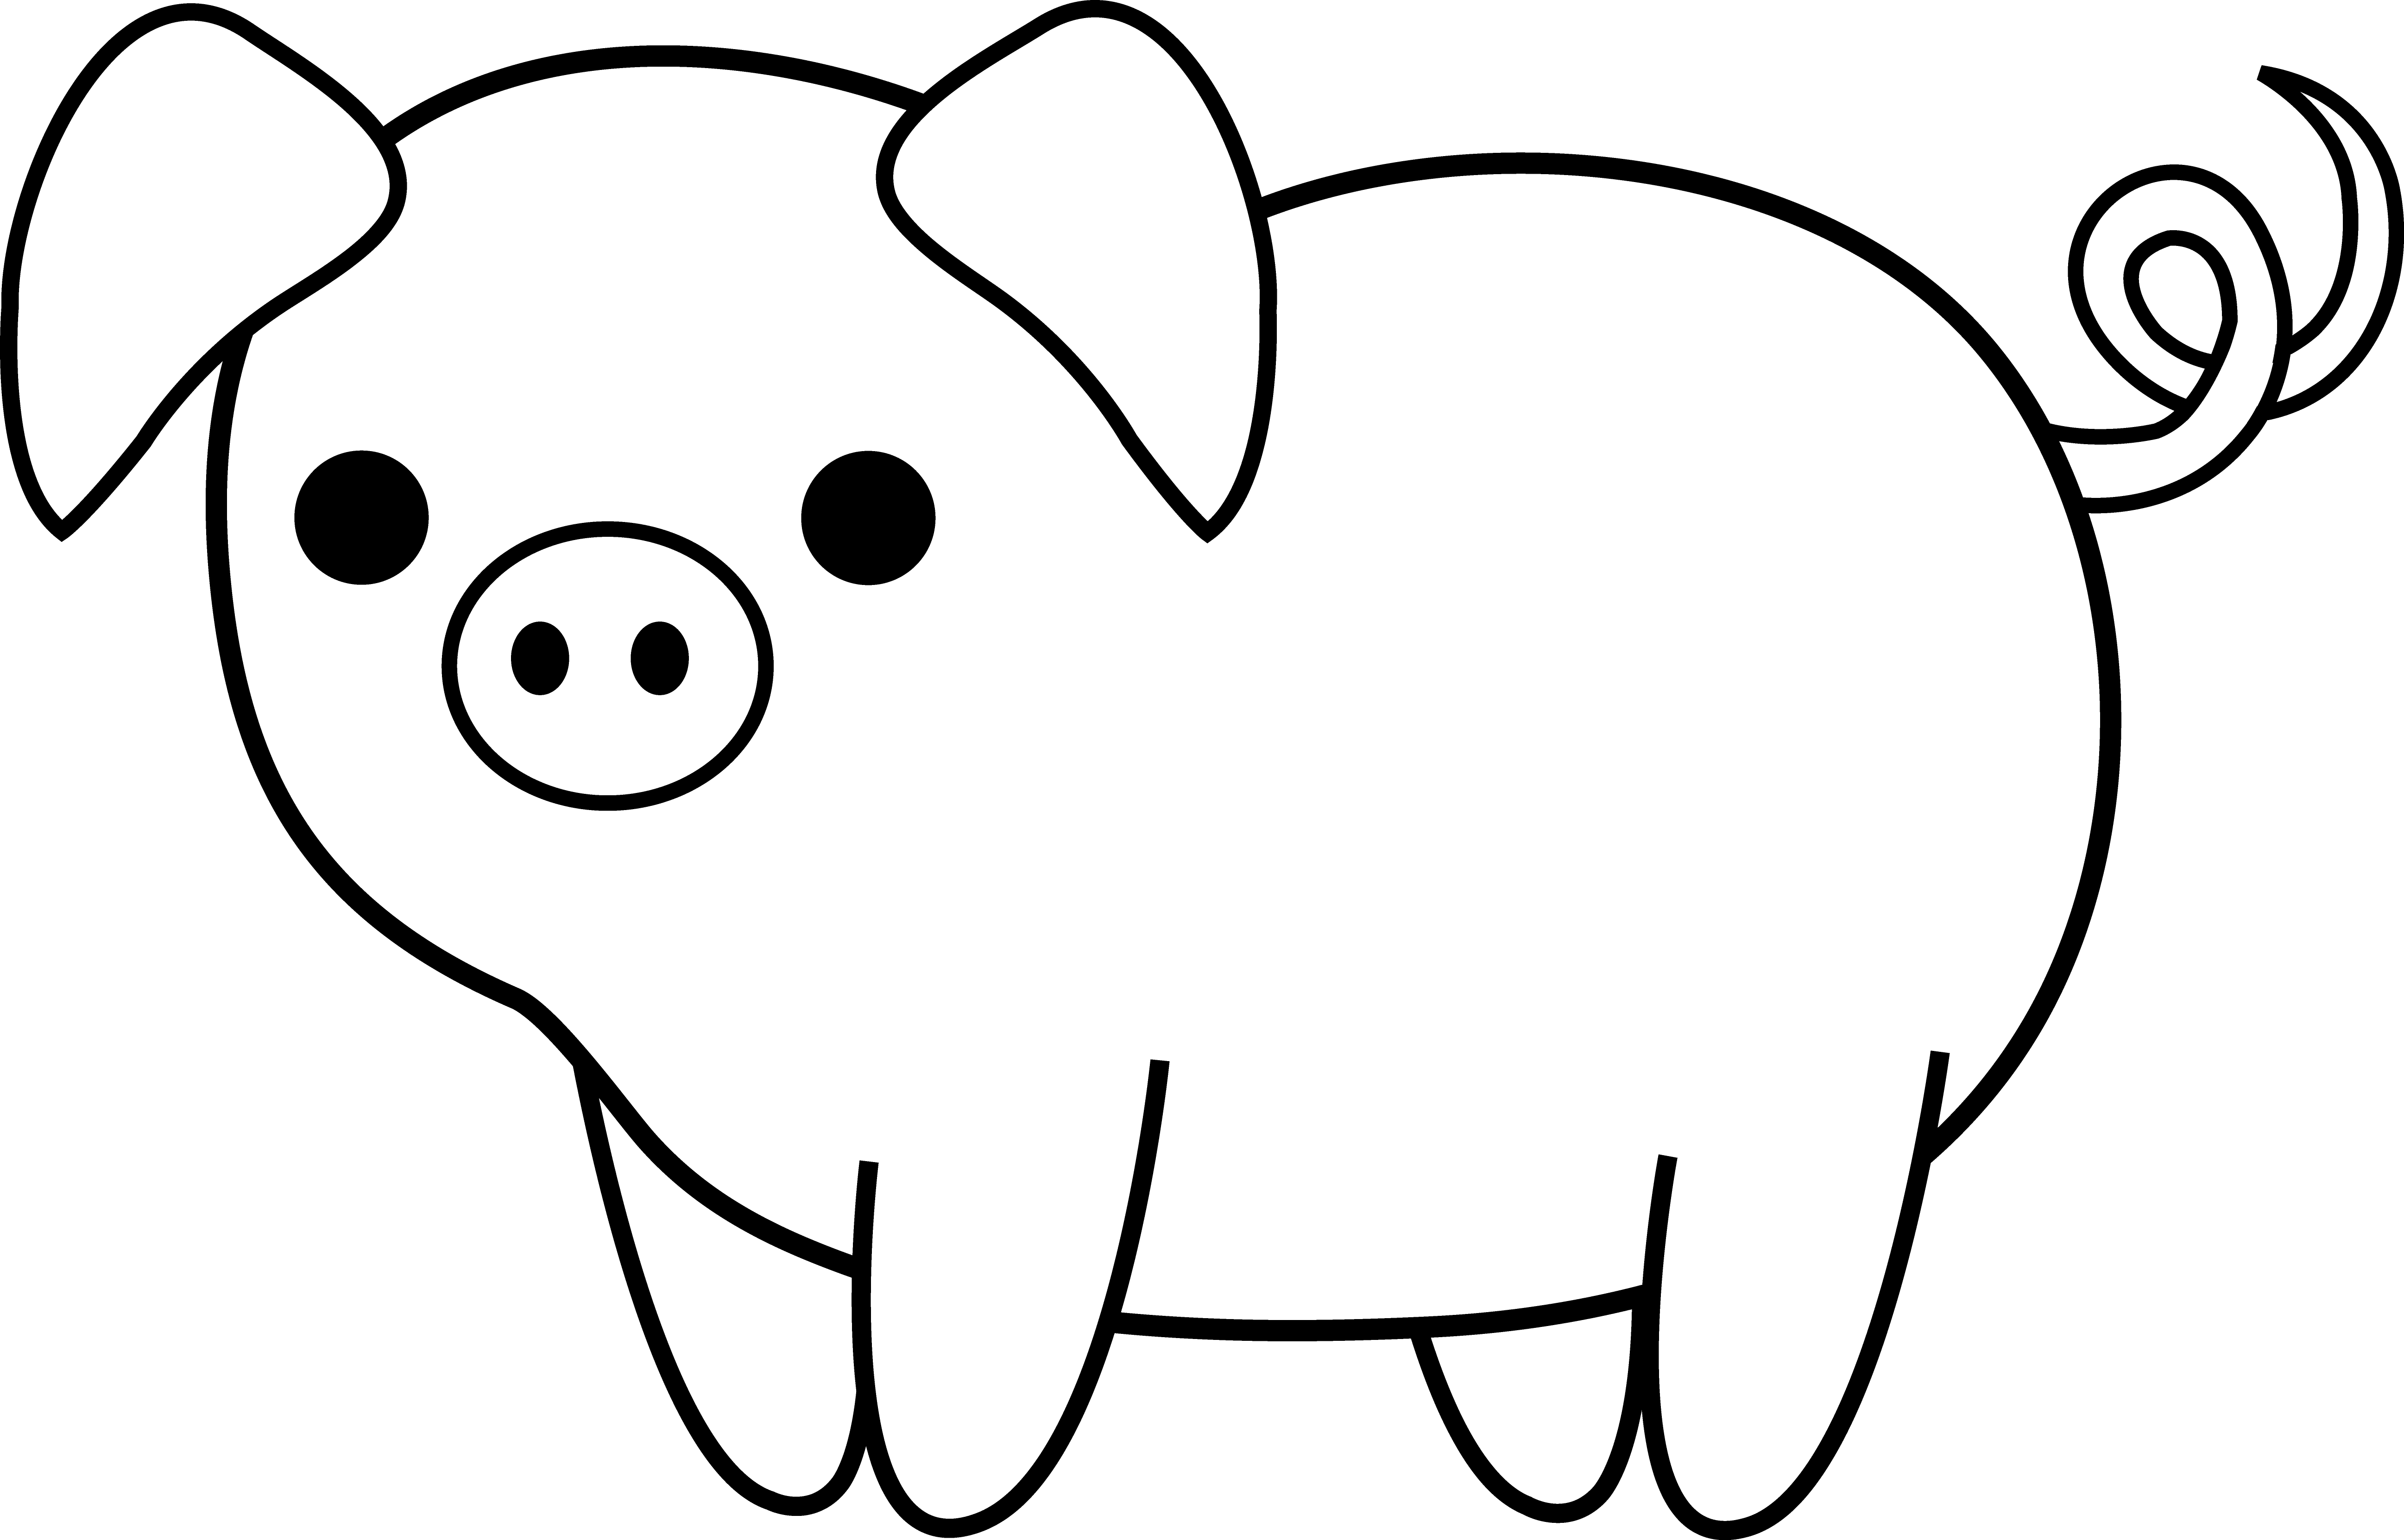 Pigs clipart easy, Pigs easy Transparent FREE for download